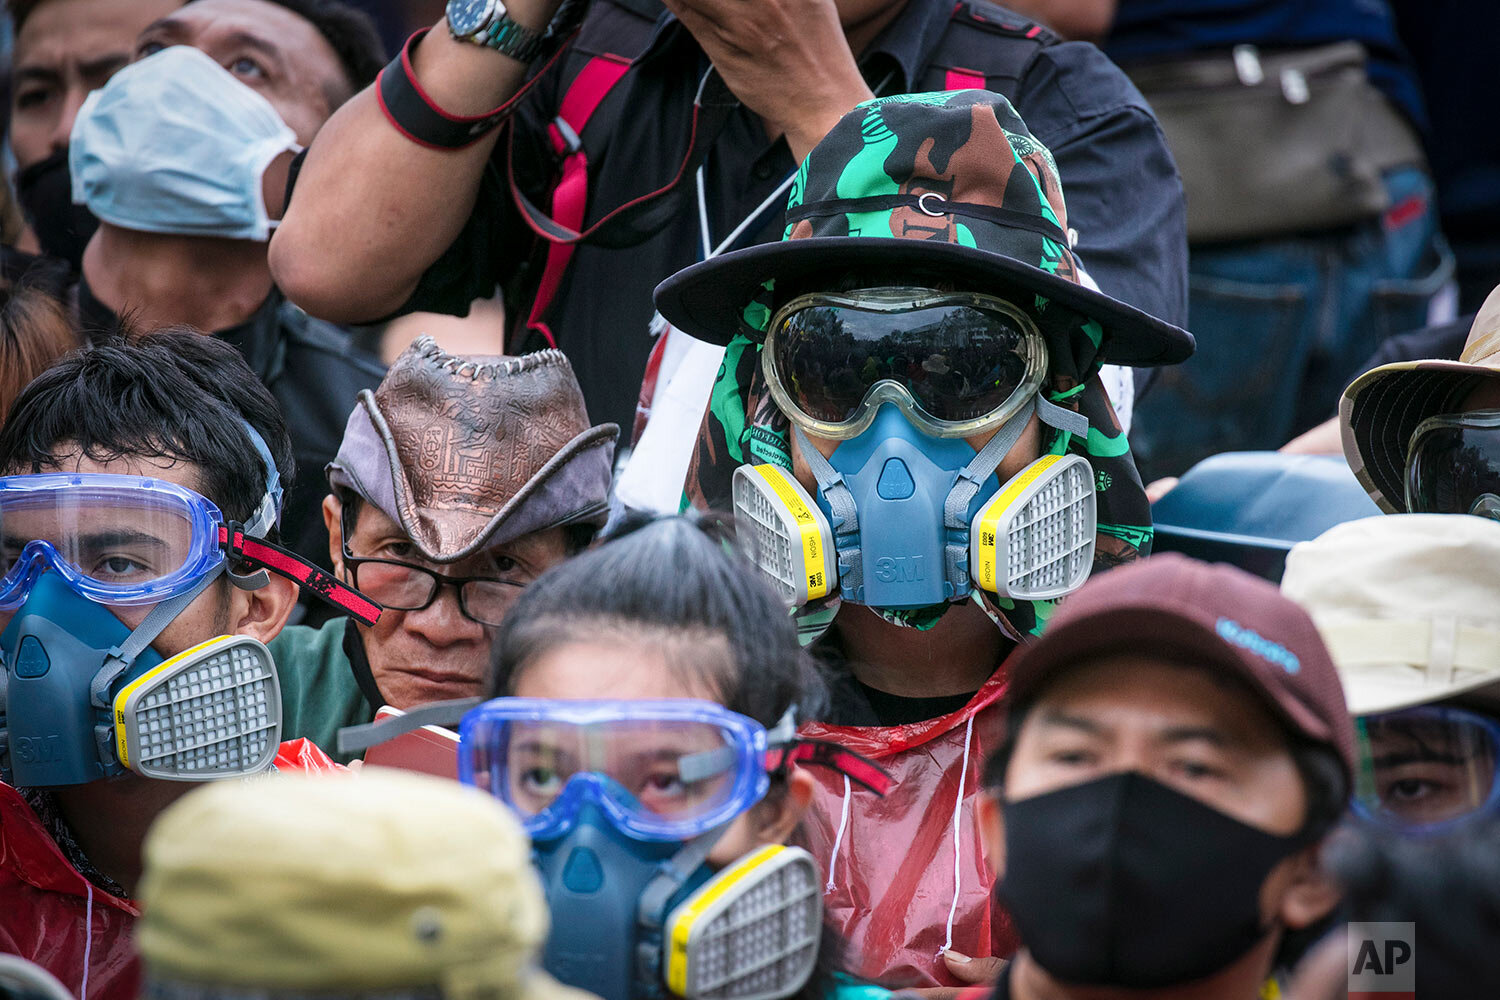  Pro-democracy protesters wear masks usually used to avoid tear gas during a protest in Bangkok, Thailand, Sunday, Sept. 20, 2020.  (AP Photo/Wason Wanichakorn) 